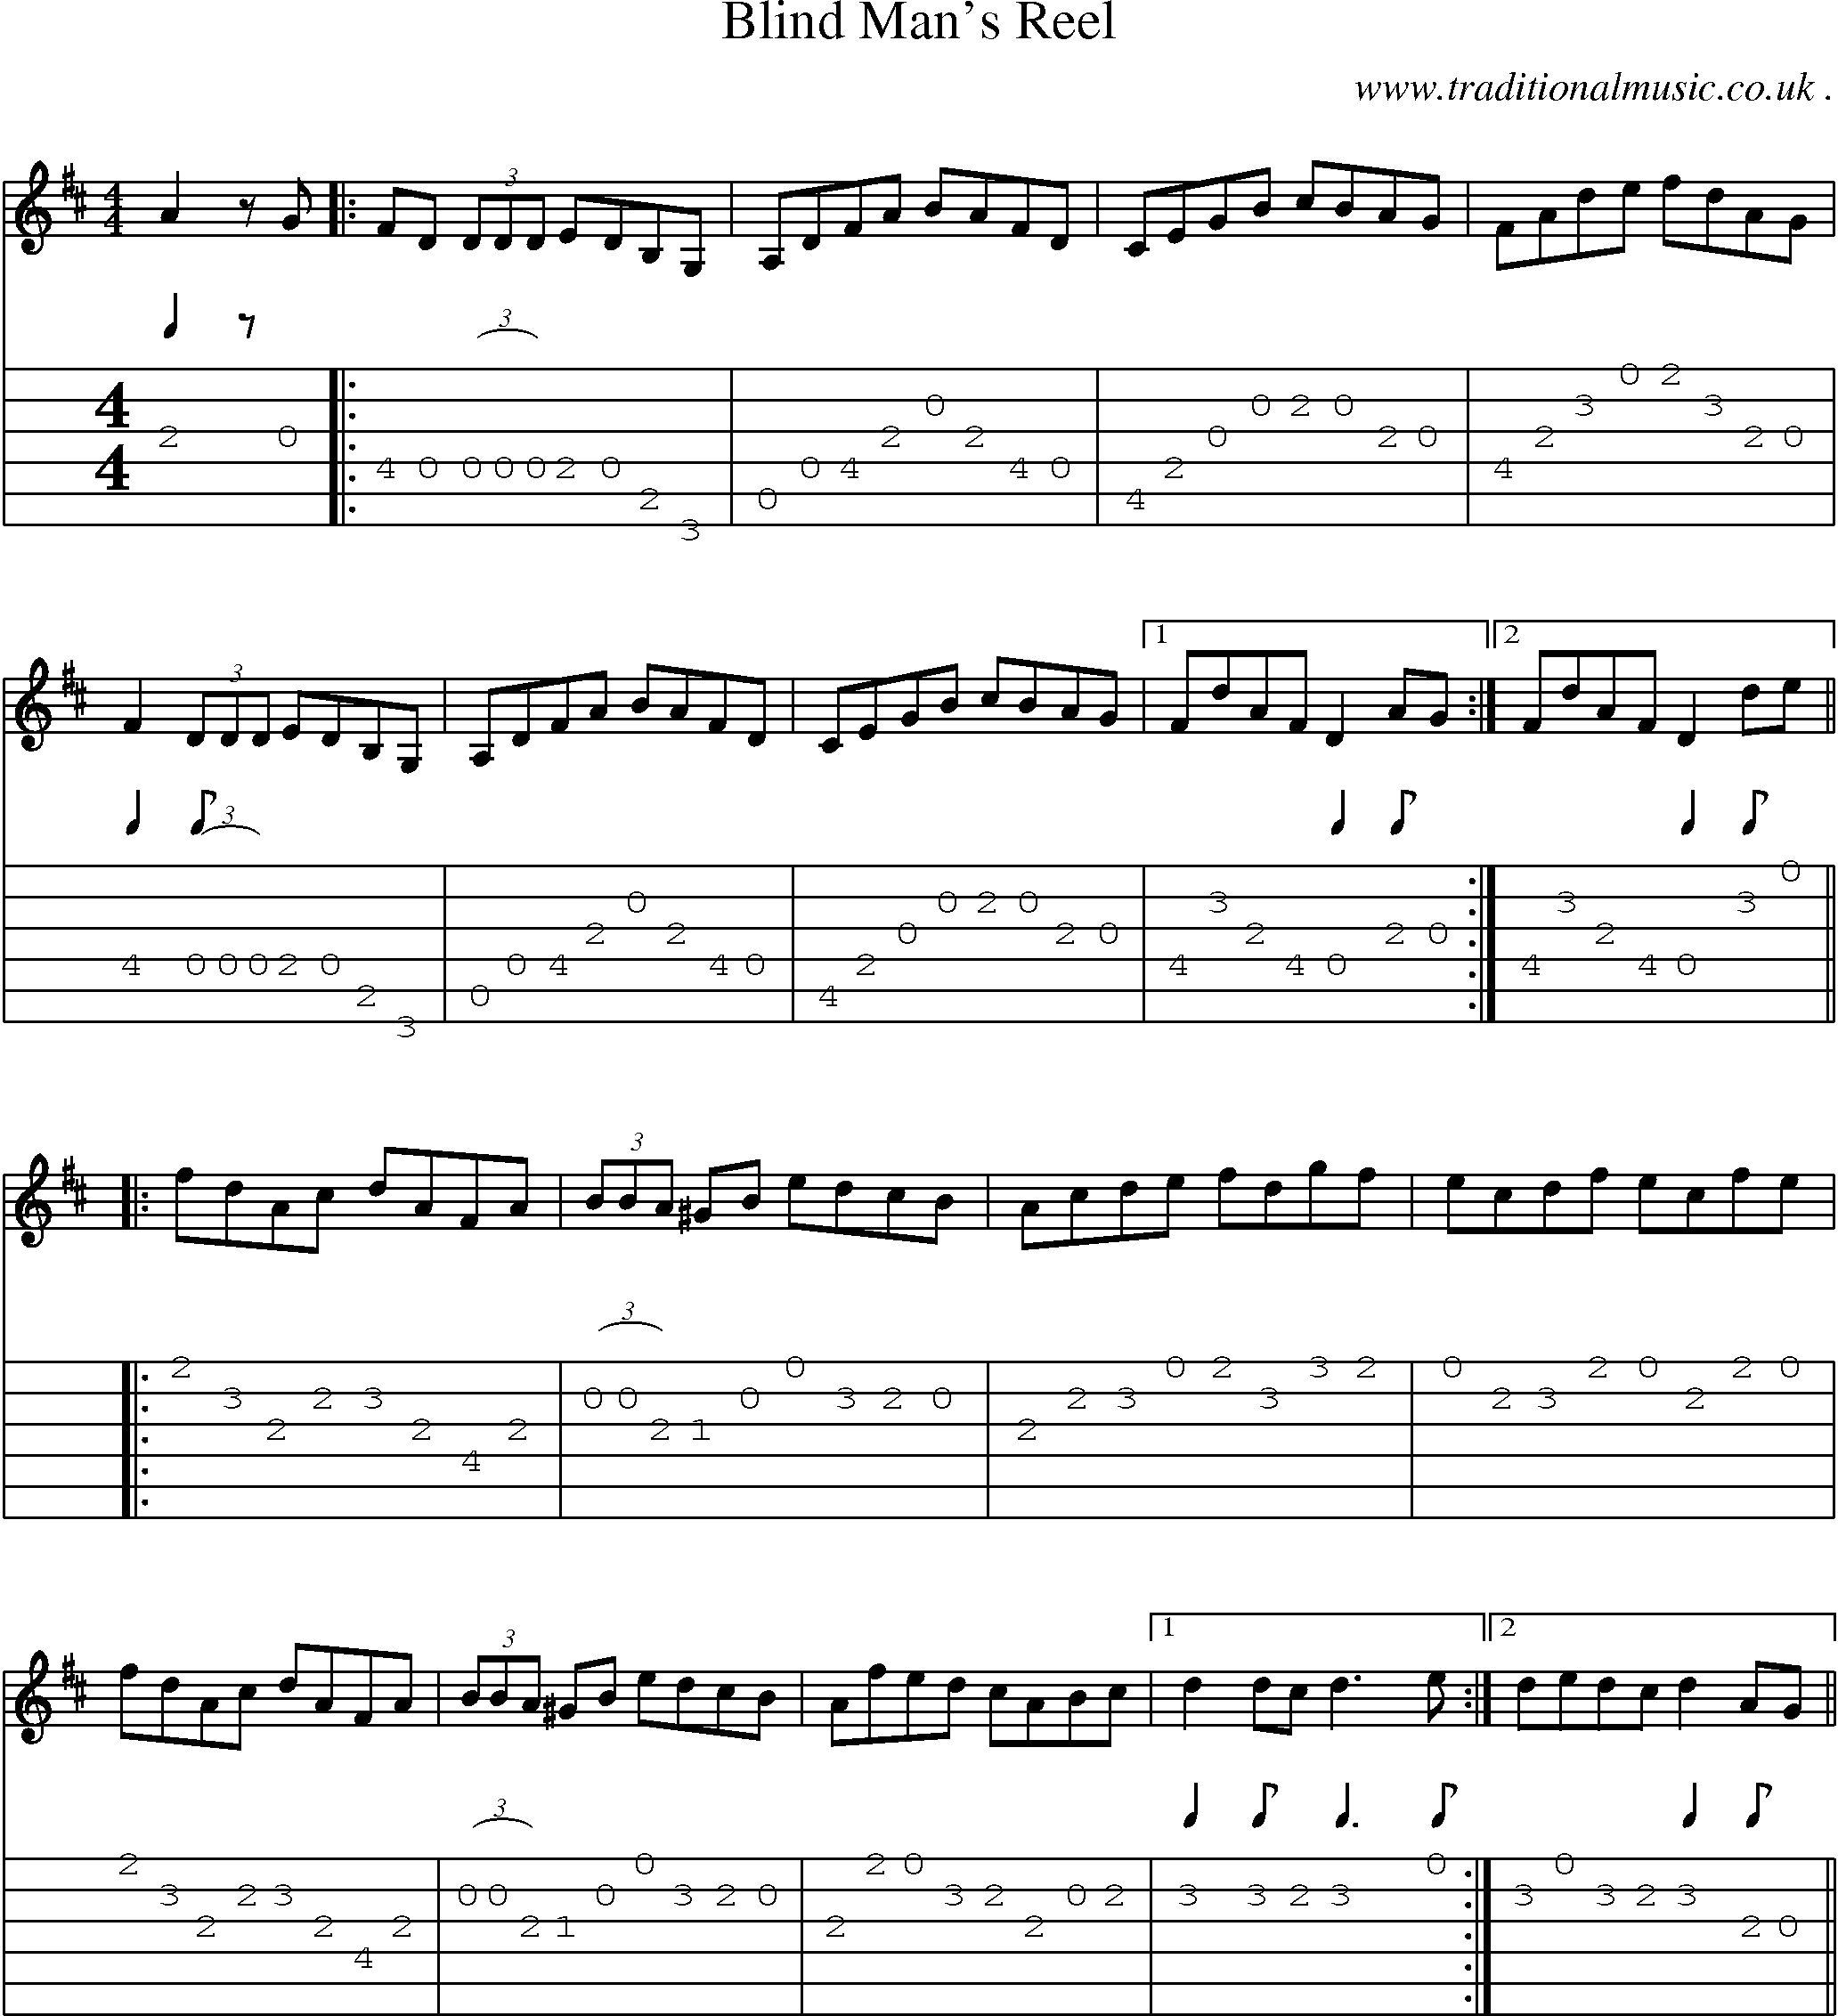 Music Score and Guitar Tabs for Blind Mans Reel